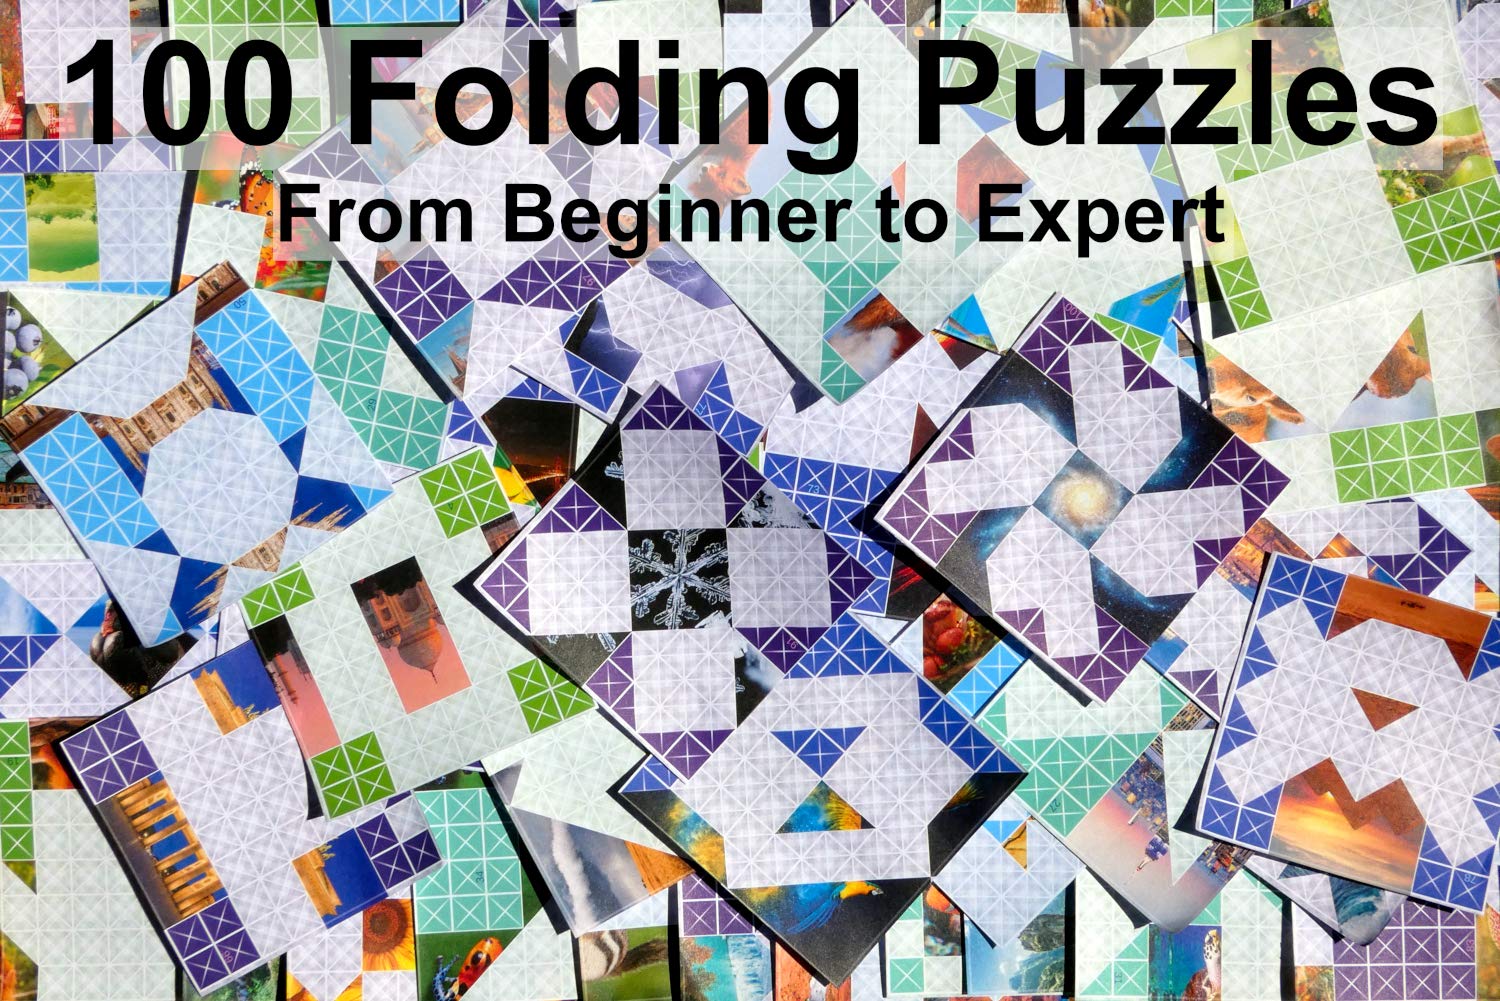 Foldology - The Origami Puzzle Game! Hands-On Brain Teasers for Tweens, Teens & Adults. Fold the Paper to Complete the Picture. 100 Challenges from Easy to Expert. Ages 10+